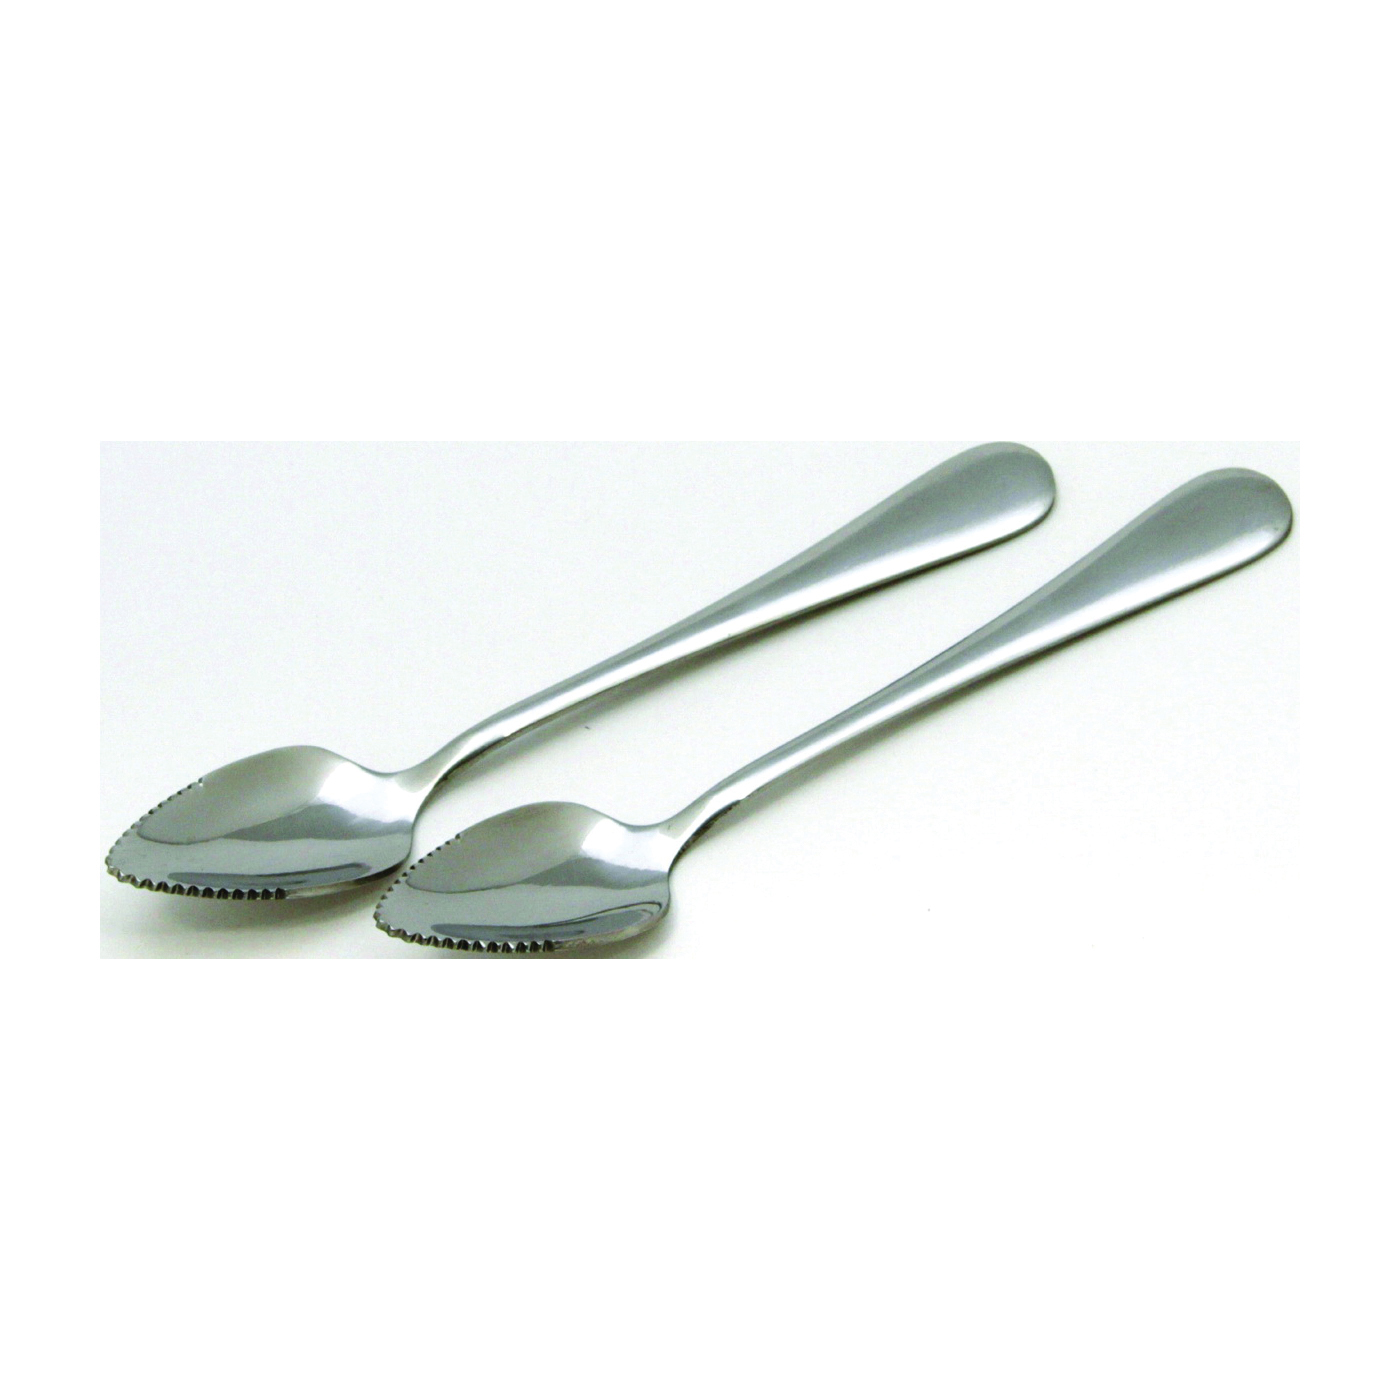 Chef Craft 21521 Grapefruit Spoon Set, 7 in OAL, Stainless Steel, Polished Mirror